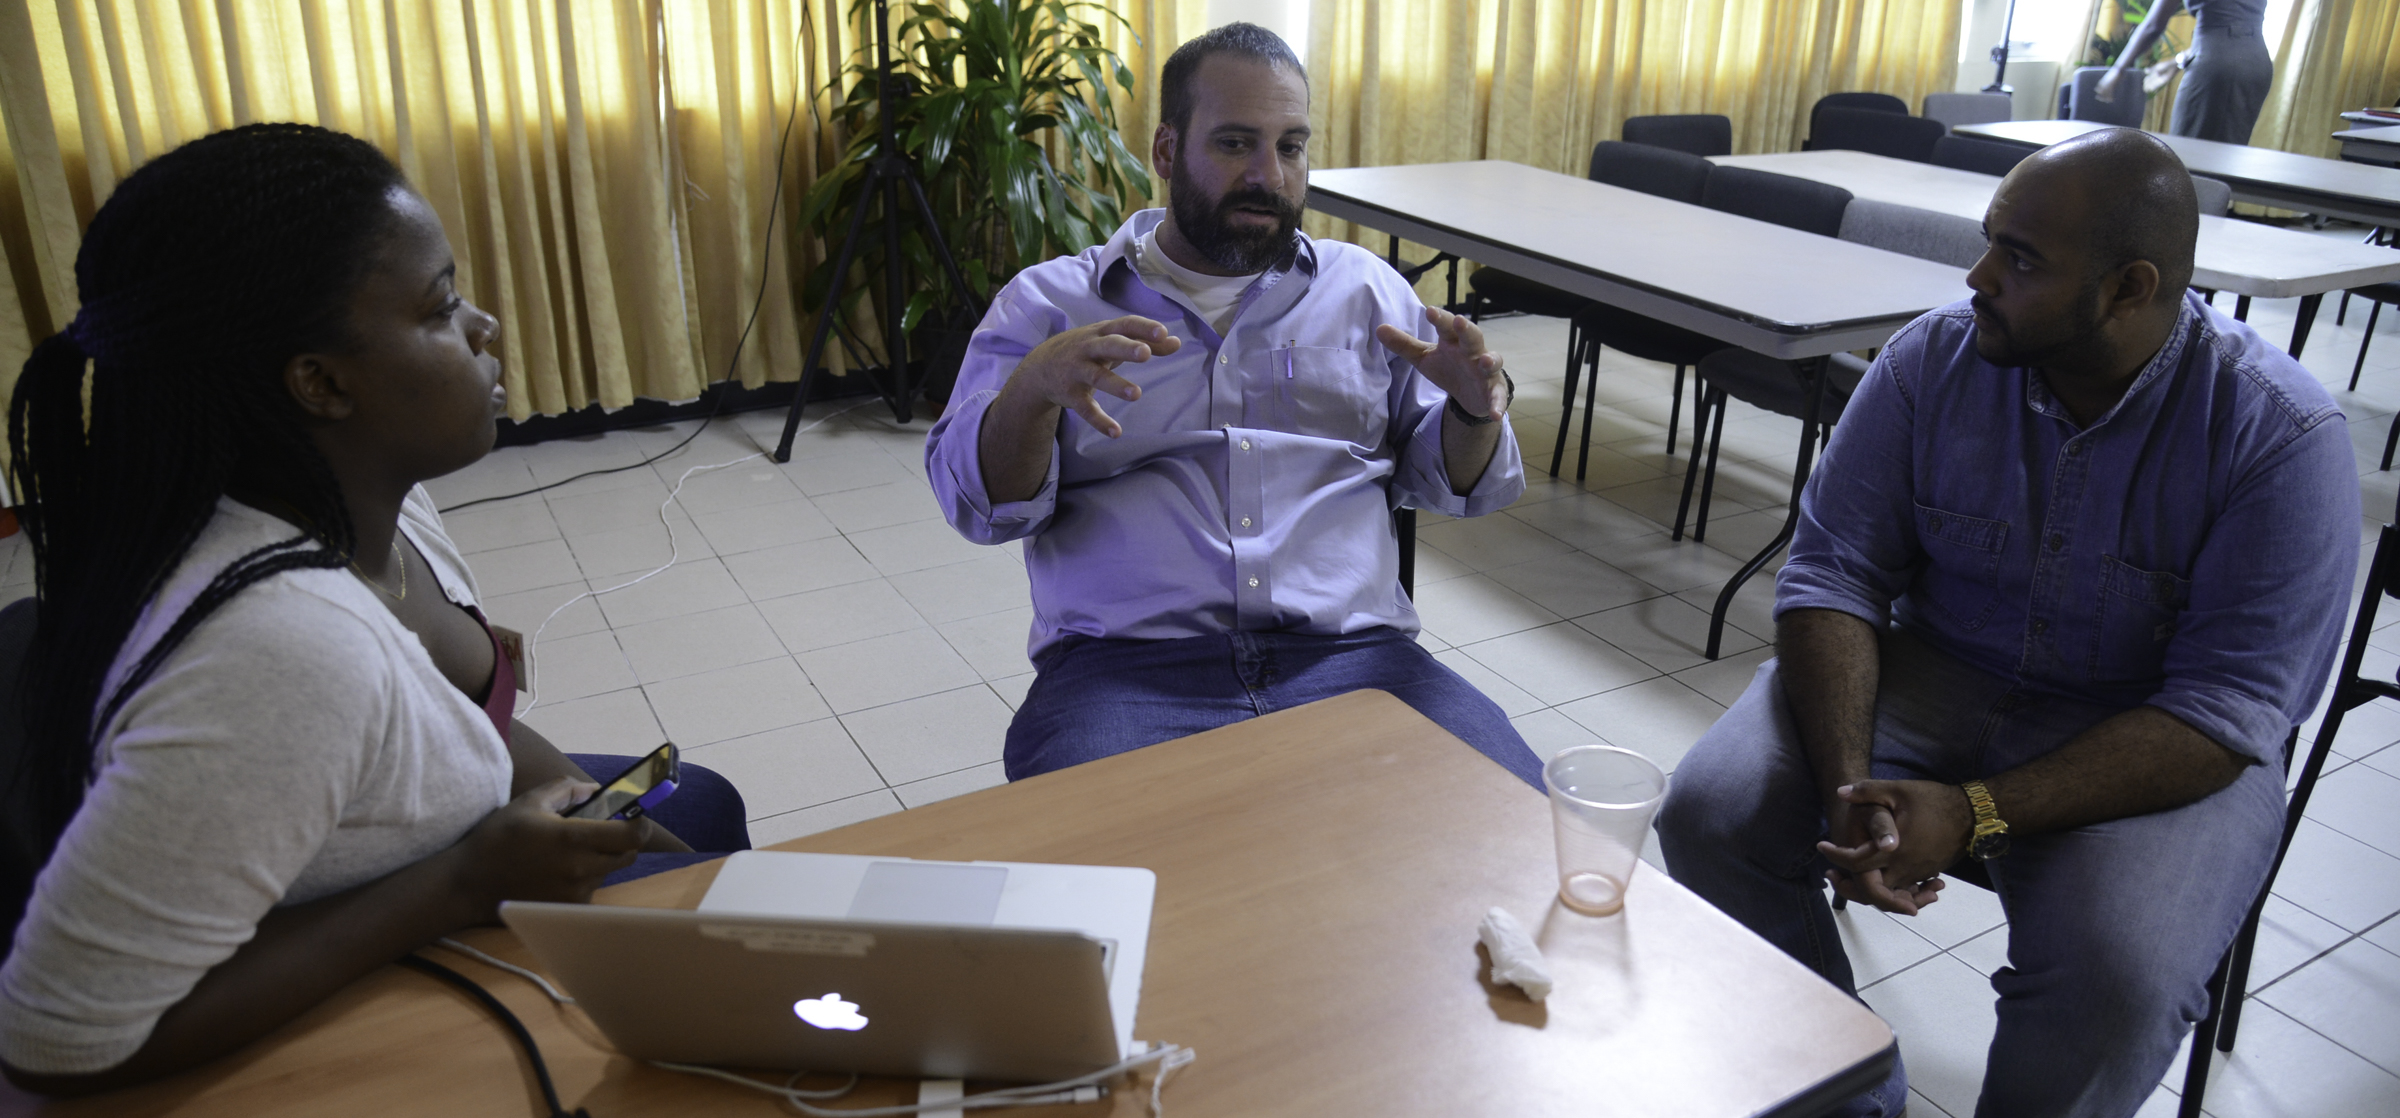 Professor Seth Gitner in discussion with UTech Jamaica media students Adrianna Miller and Ricardo Neil at the end of the two-day multimedia journalism workshop organised by the United States Embassy at the University of Technology, Jamaica on September 15 2016.